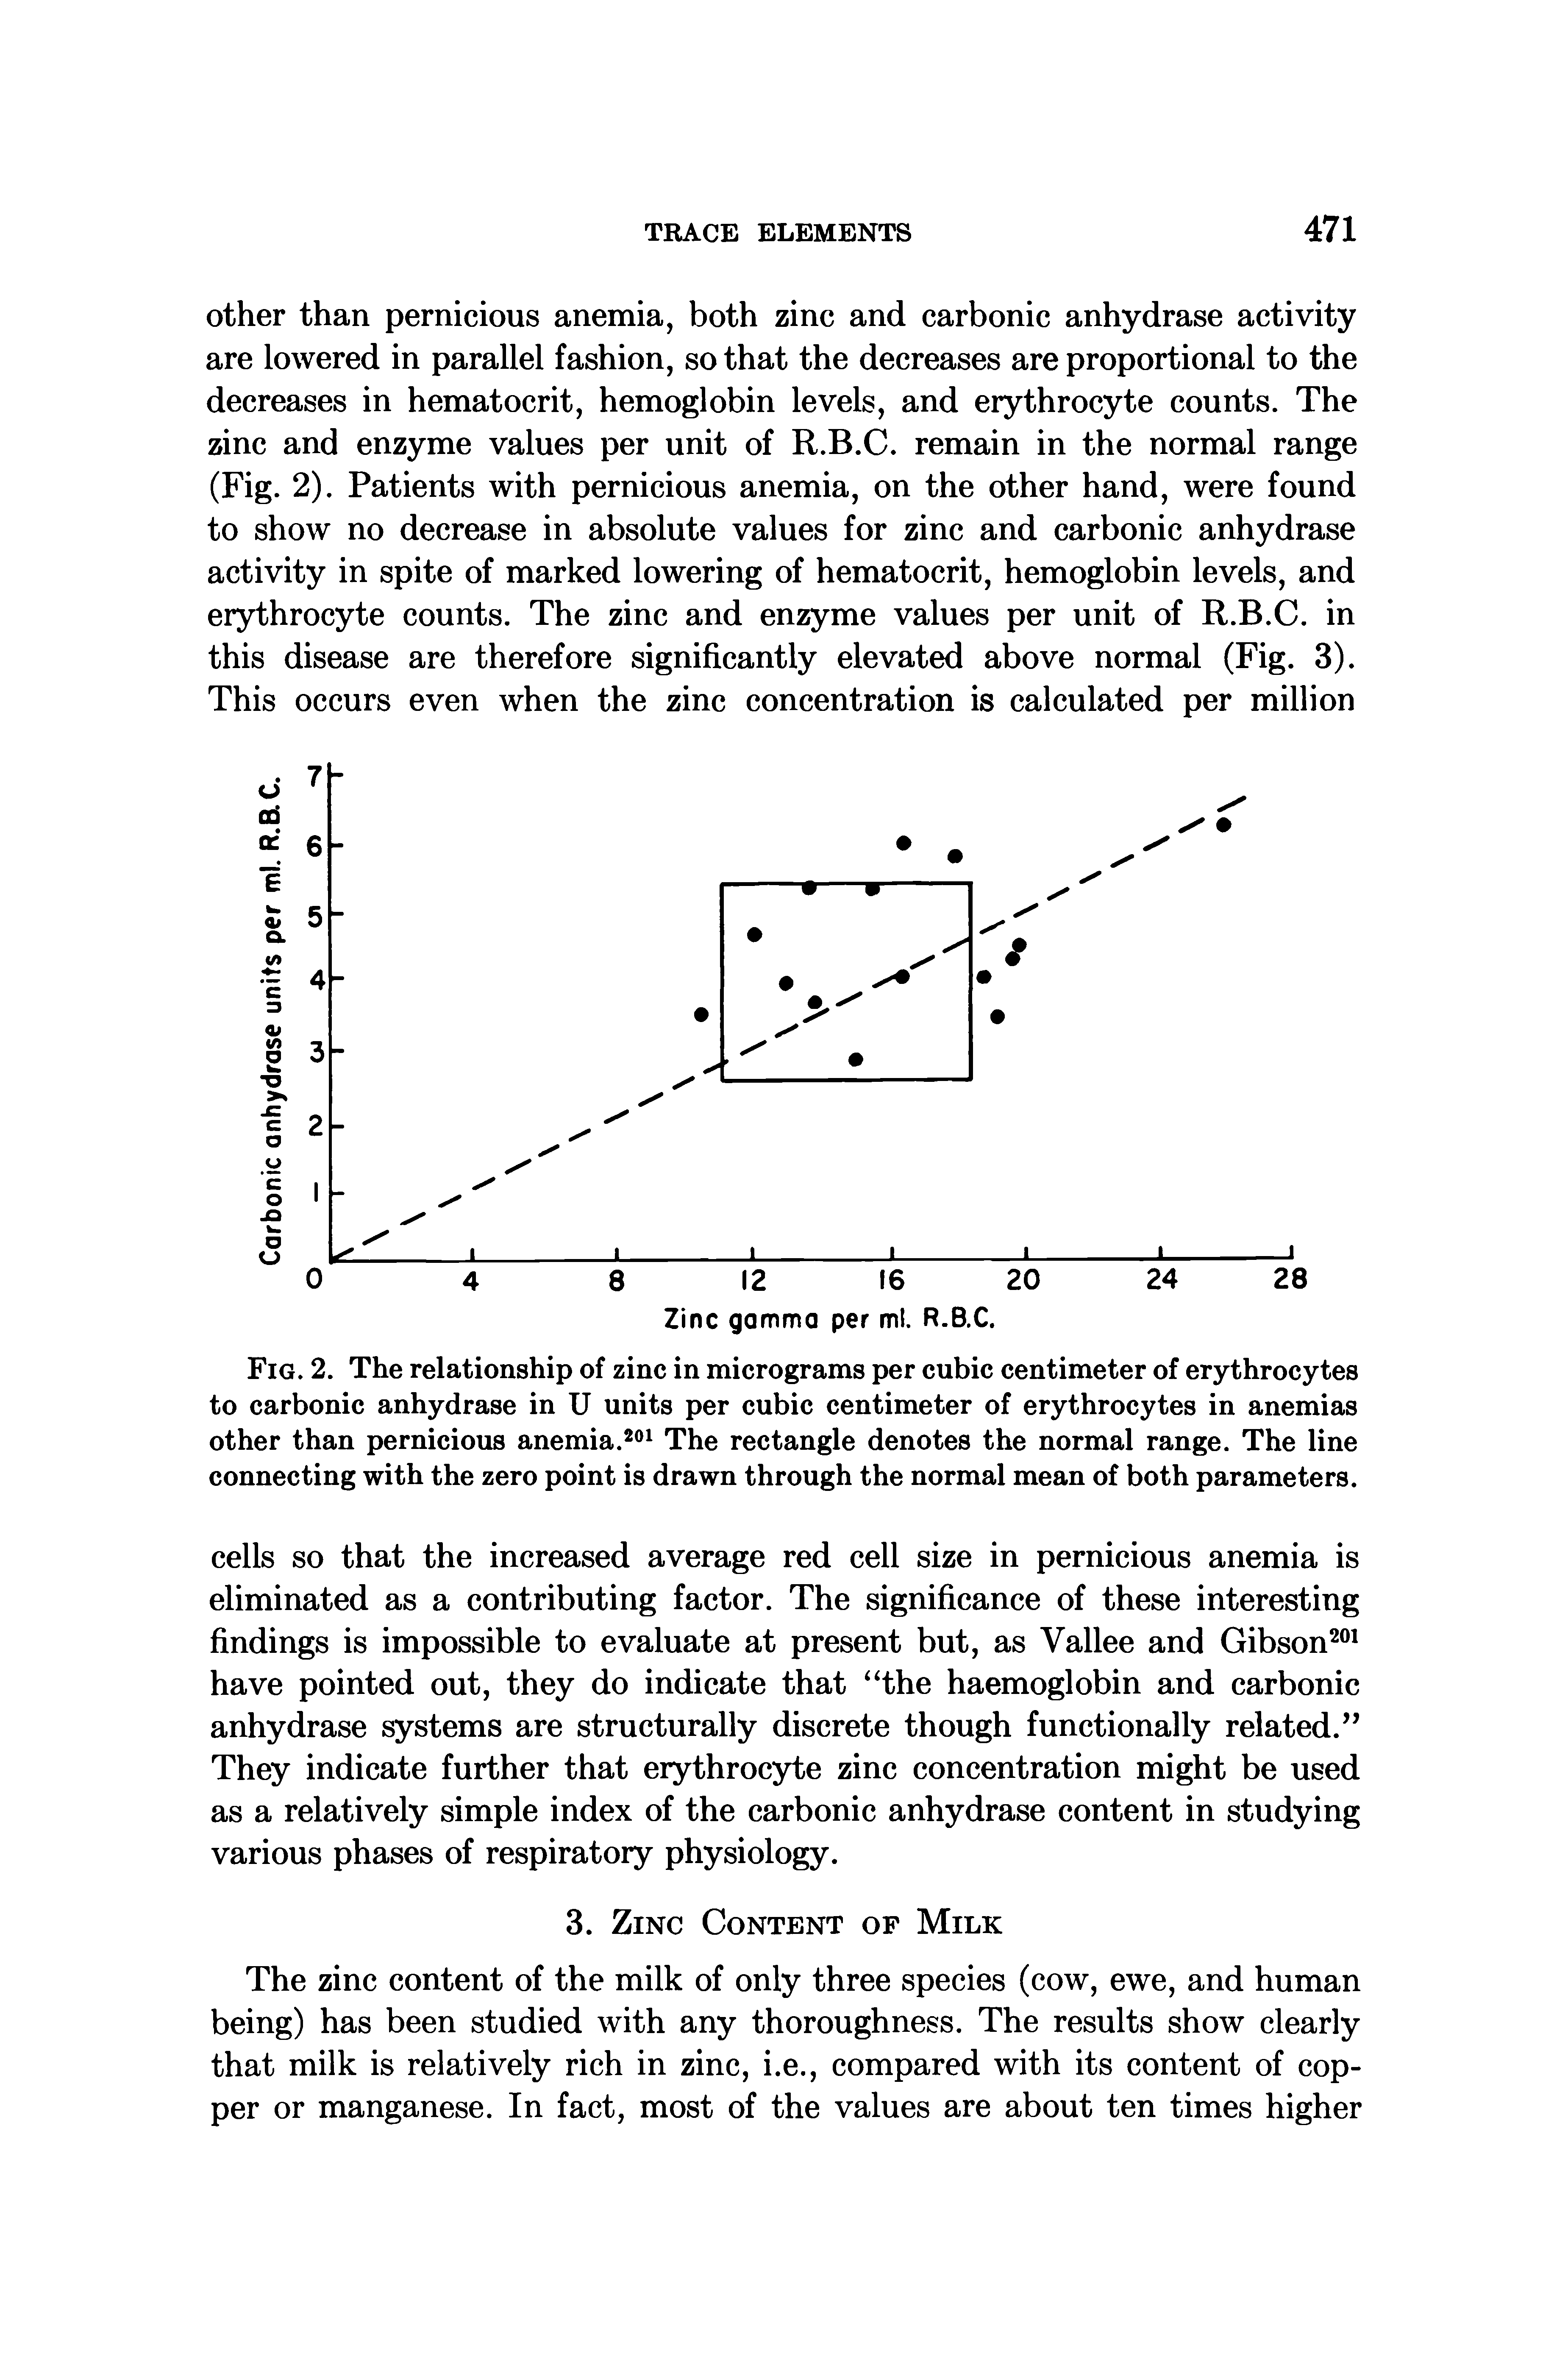 Fig. 2. The relationship of zinc in micrograms per cubic centimeter of erythrocytes to carbonic anhydrase in U units per cubic centimeter of erythrocytes in anemias other than pernicious anemia. The rectangle denotes the normal range. The line connecting with the zero point is drawn through the normal mean of both parameters.